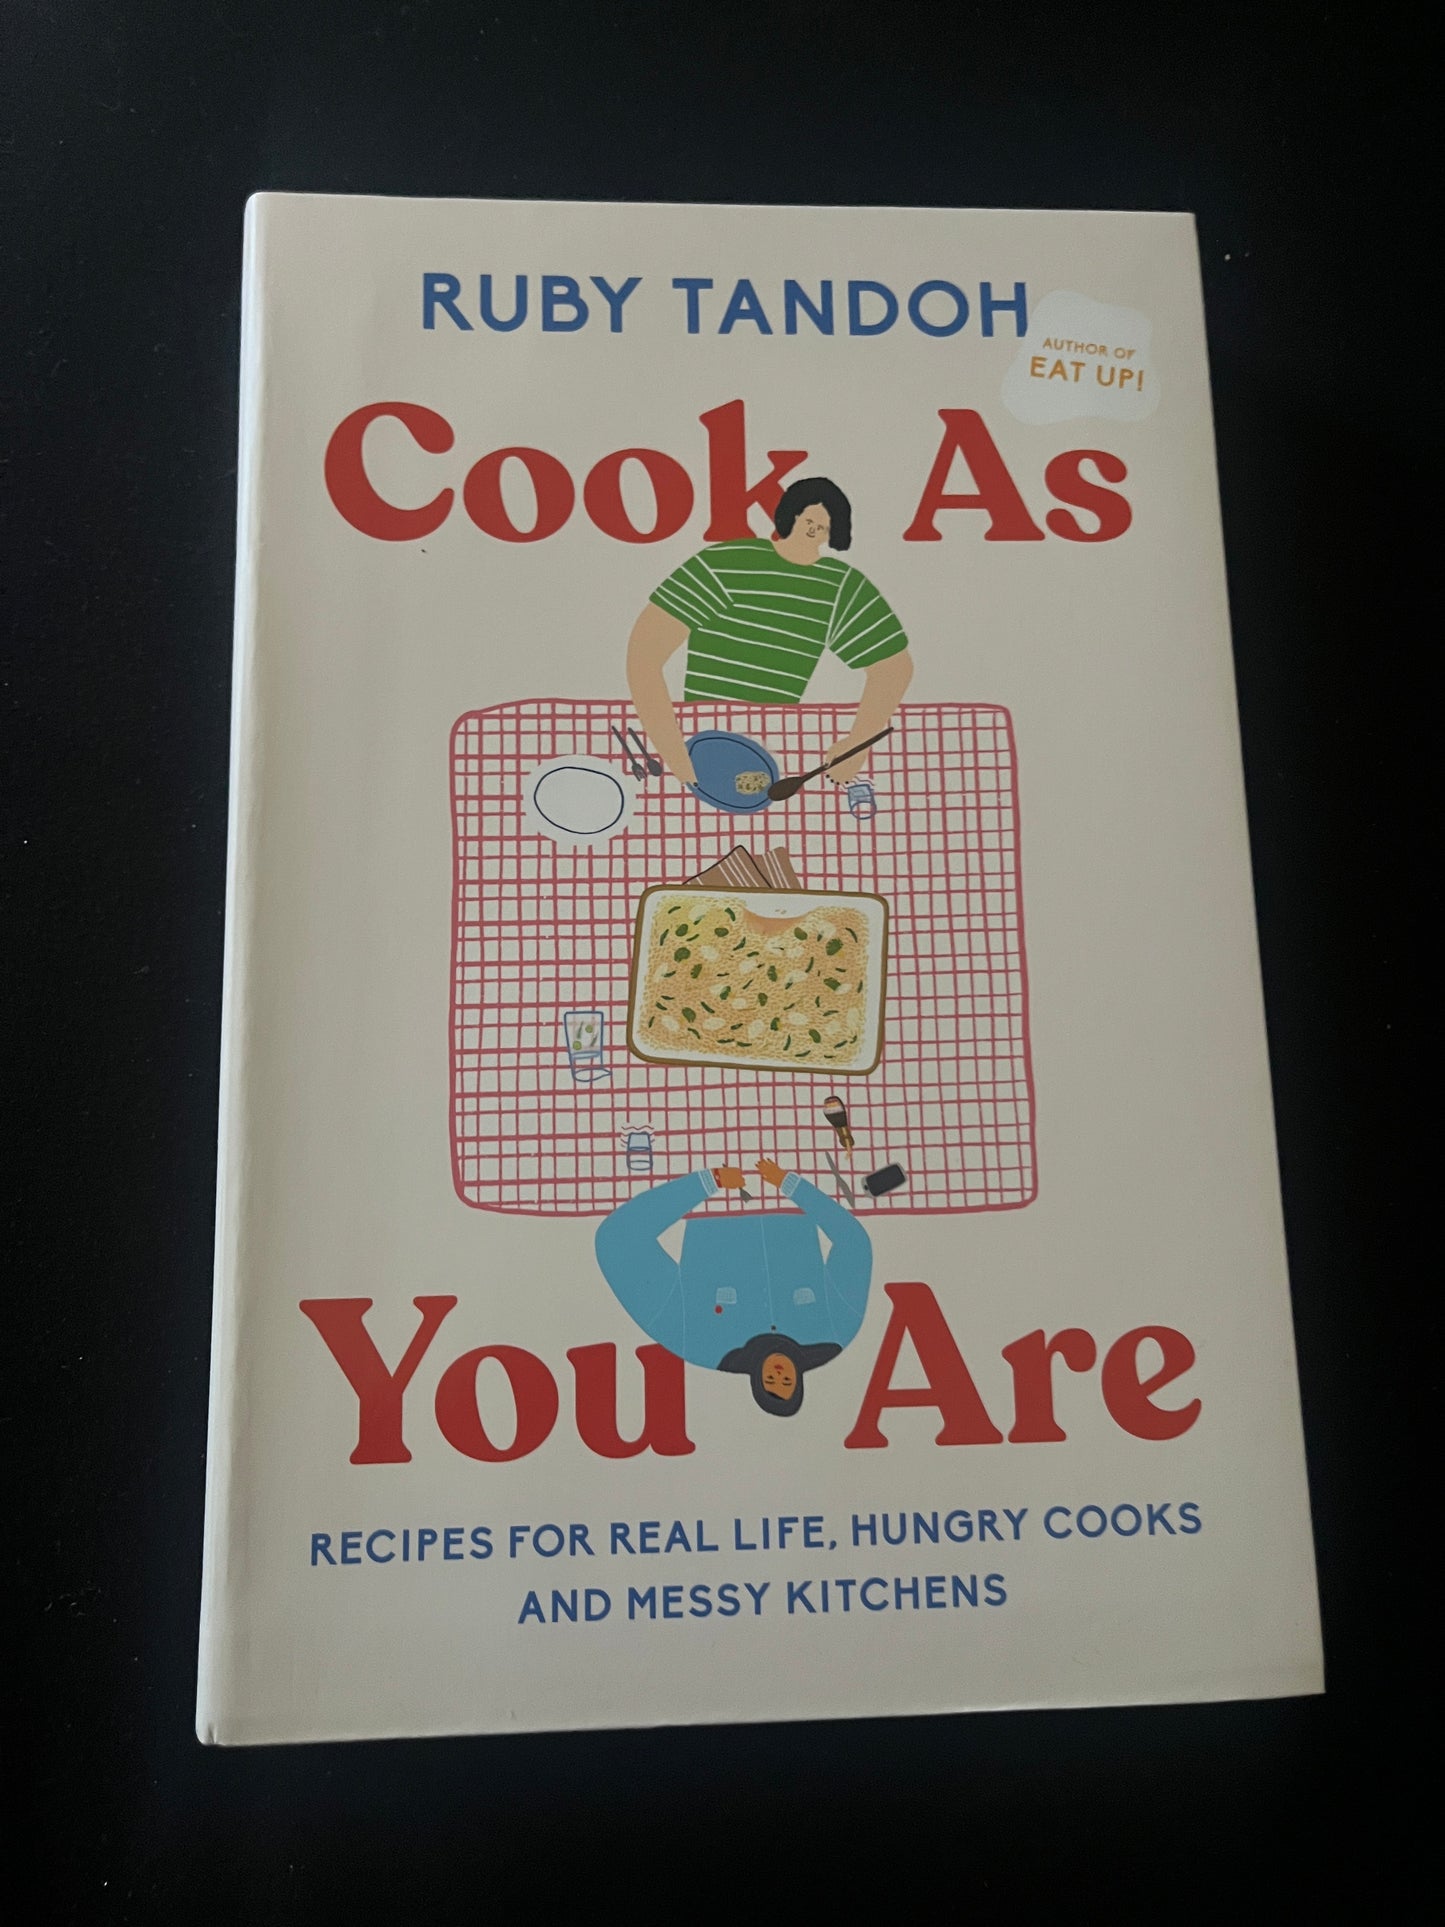 COOK AS YOU ARE: Recipes for Real Life, Hungry Cooks and Messy Kitchens by Ruby Tandoh